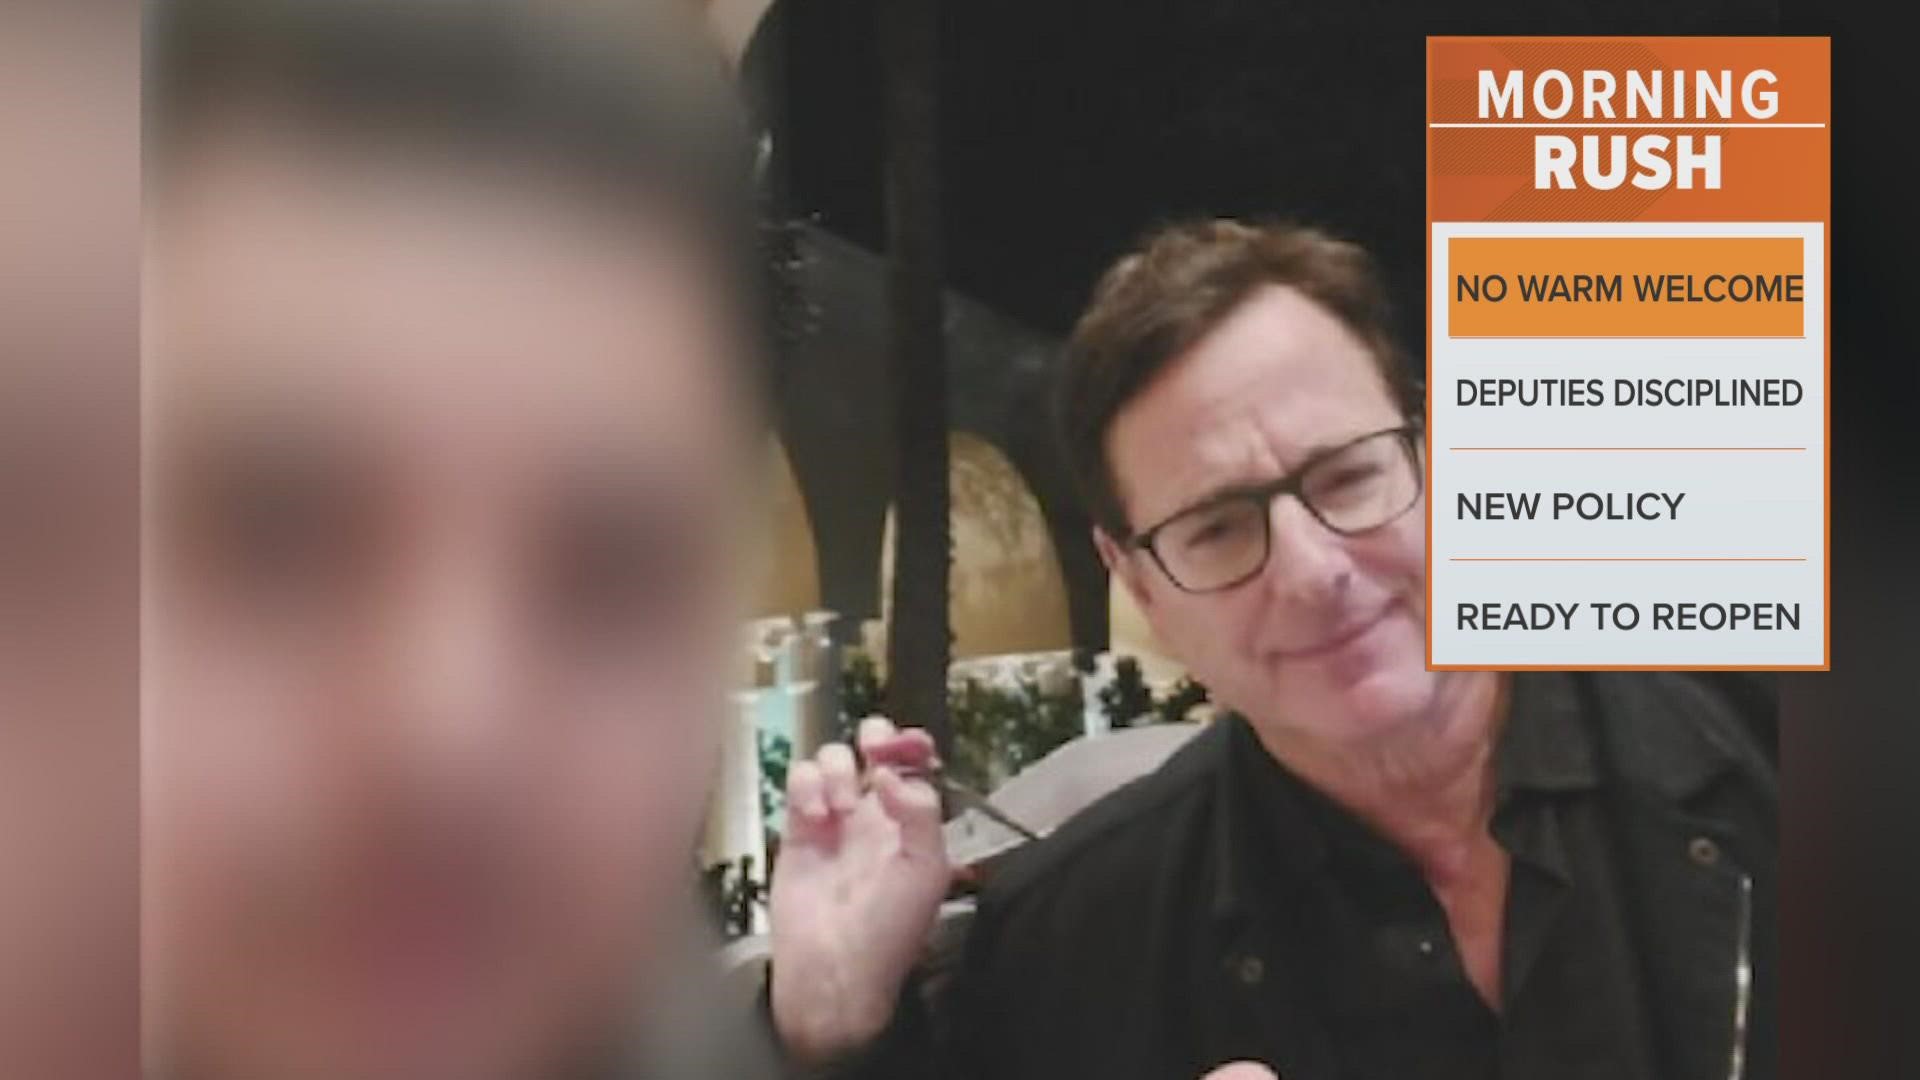 Two Florida sheriff's deputies have been disciplined for sharing information about the Saget investigation.